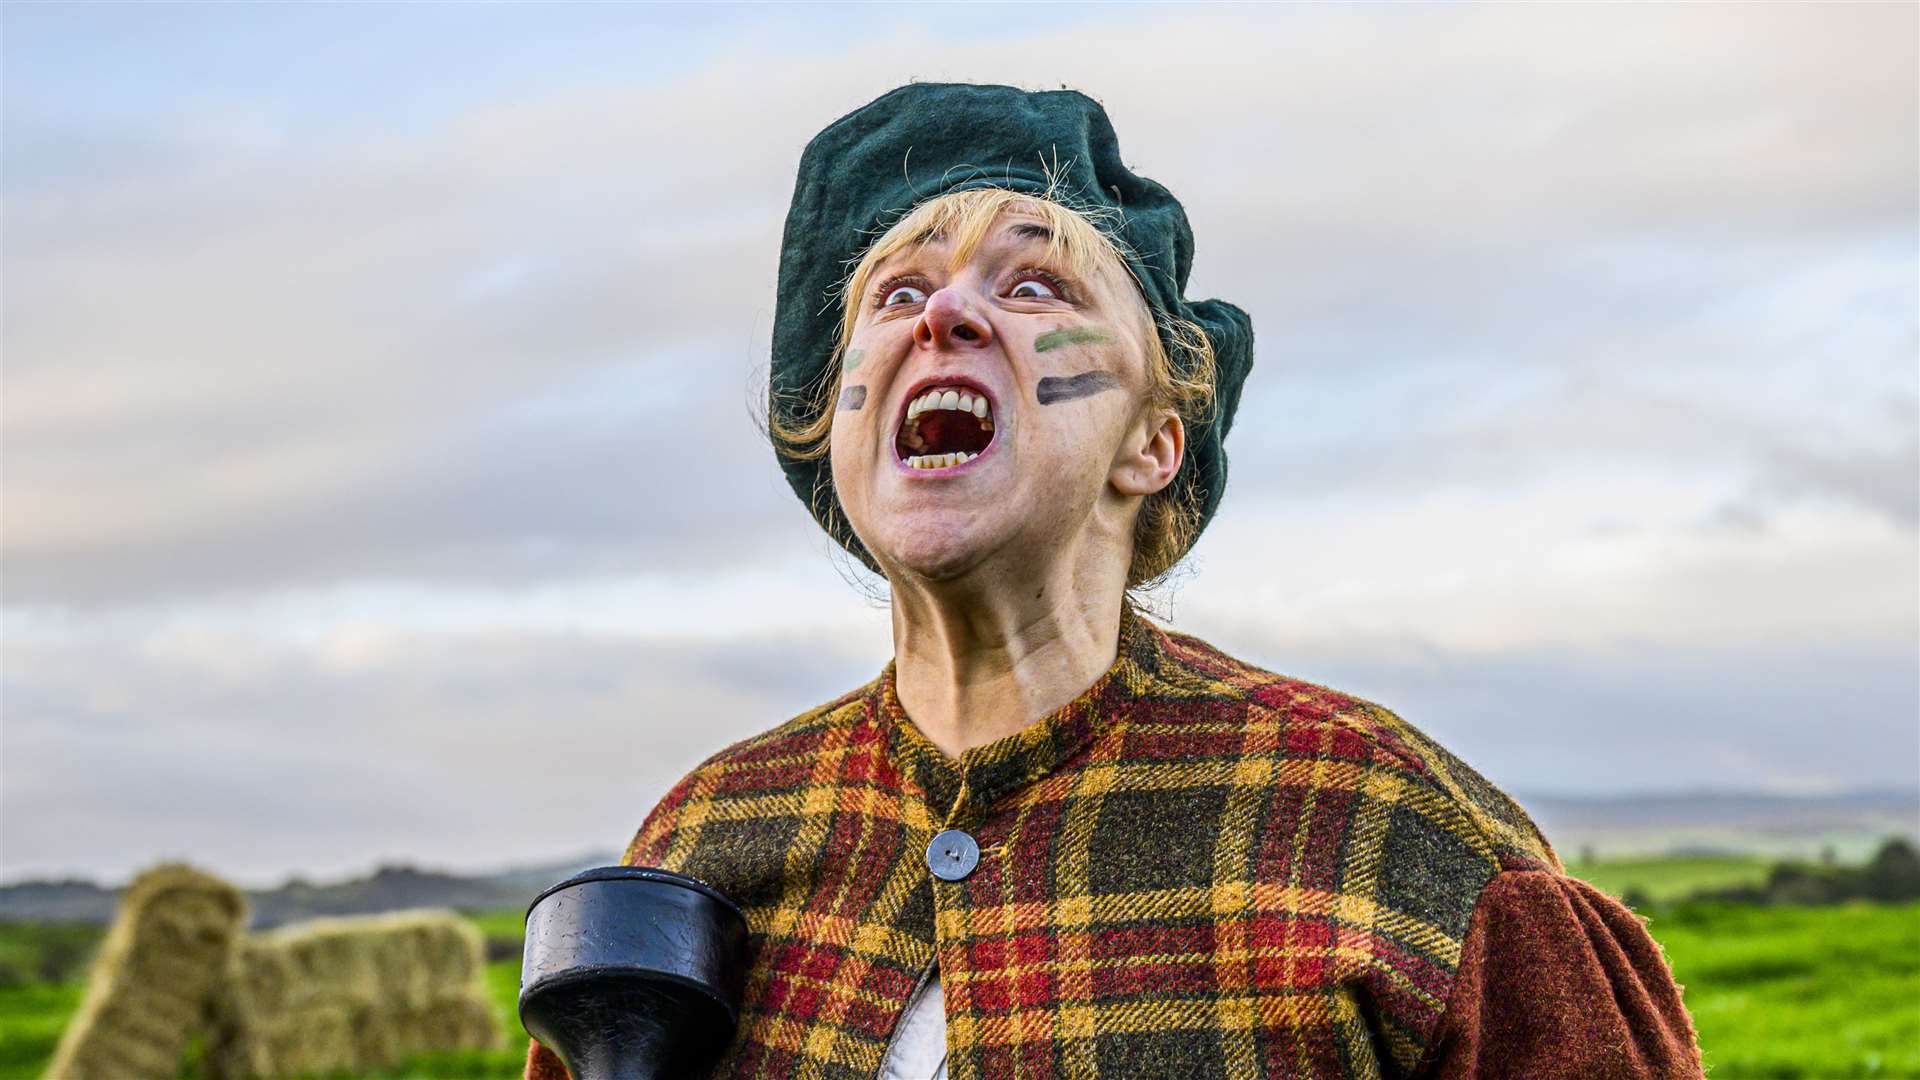 Comedy show OMC is set to bring some side-splitting silliness to the Hogmanay celebrations.